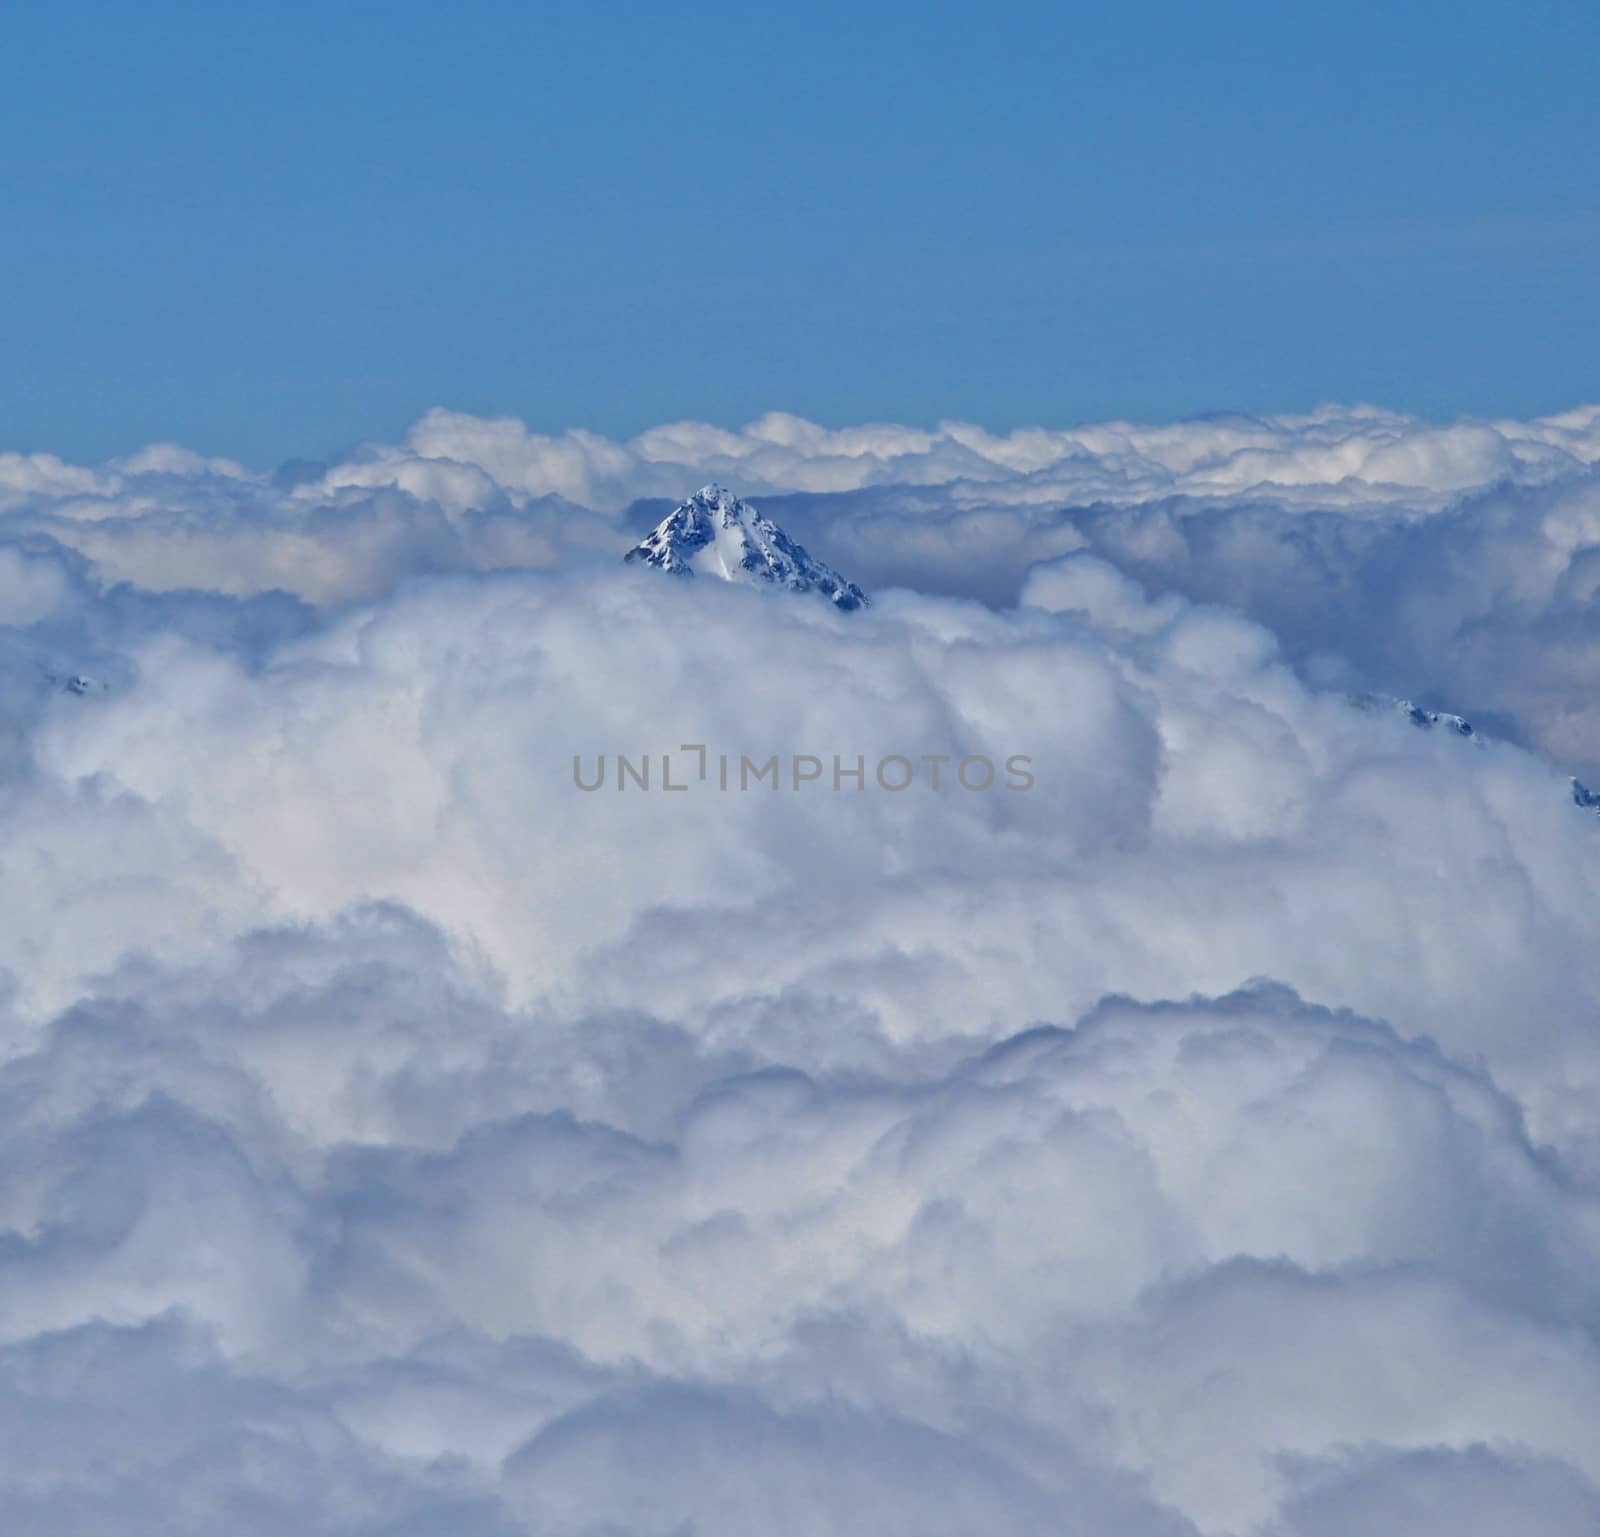 Peak of a 4000m Swiss mountain visable through the clouds